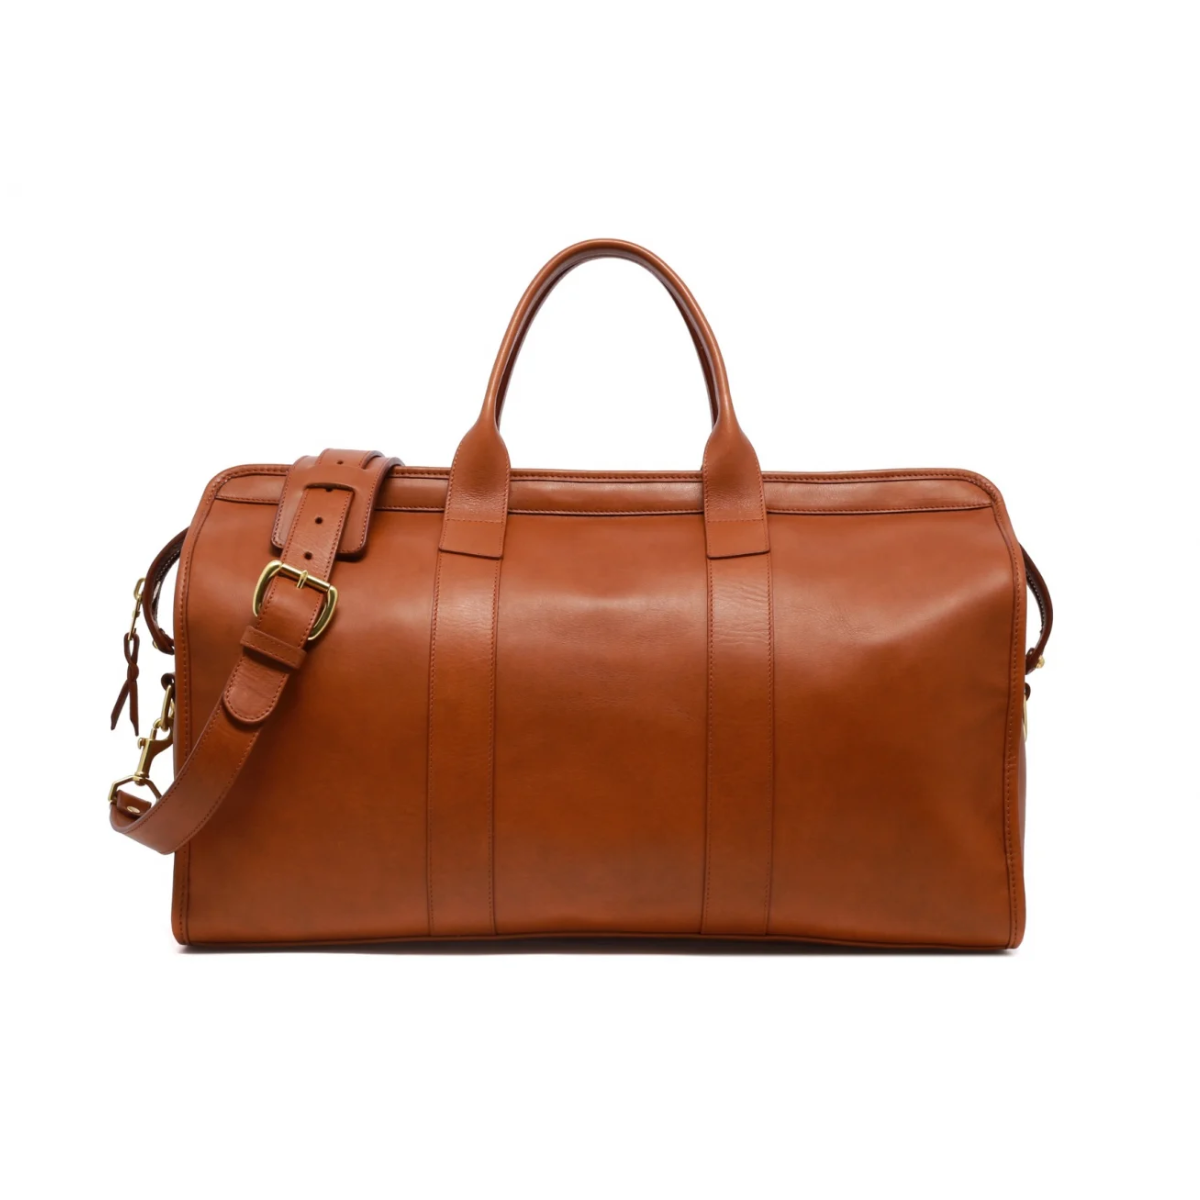 35. Timeless Elegance: Unleash Adventure with a Leather Travel Duffle Bag for Your 2nd Anniversary